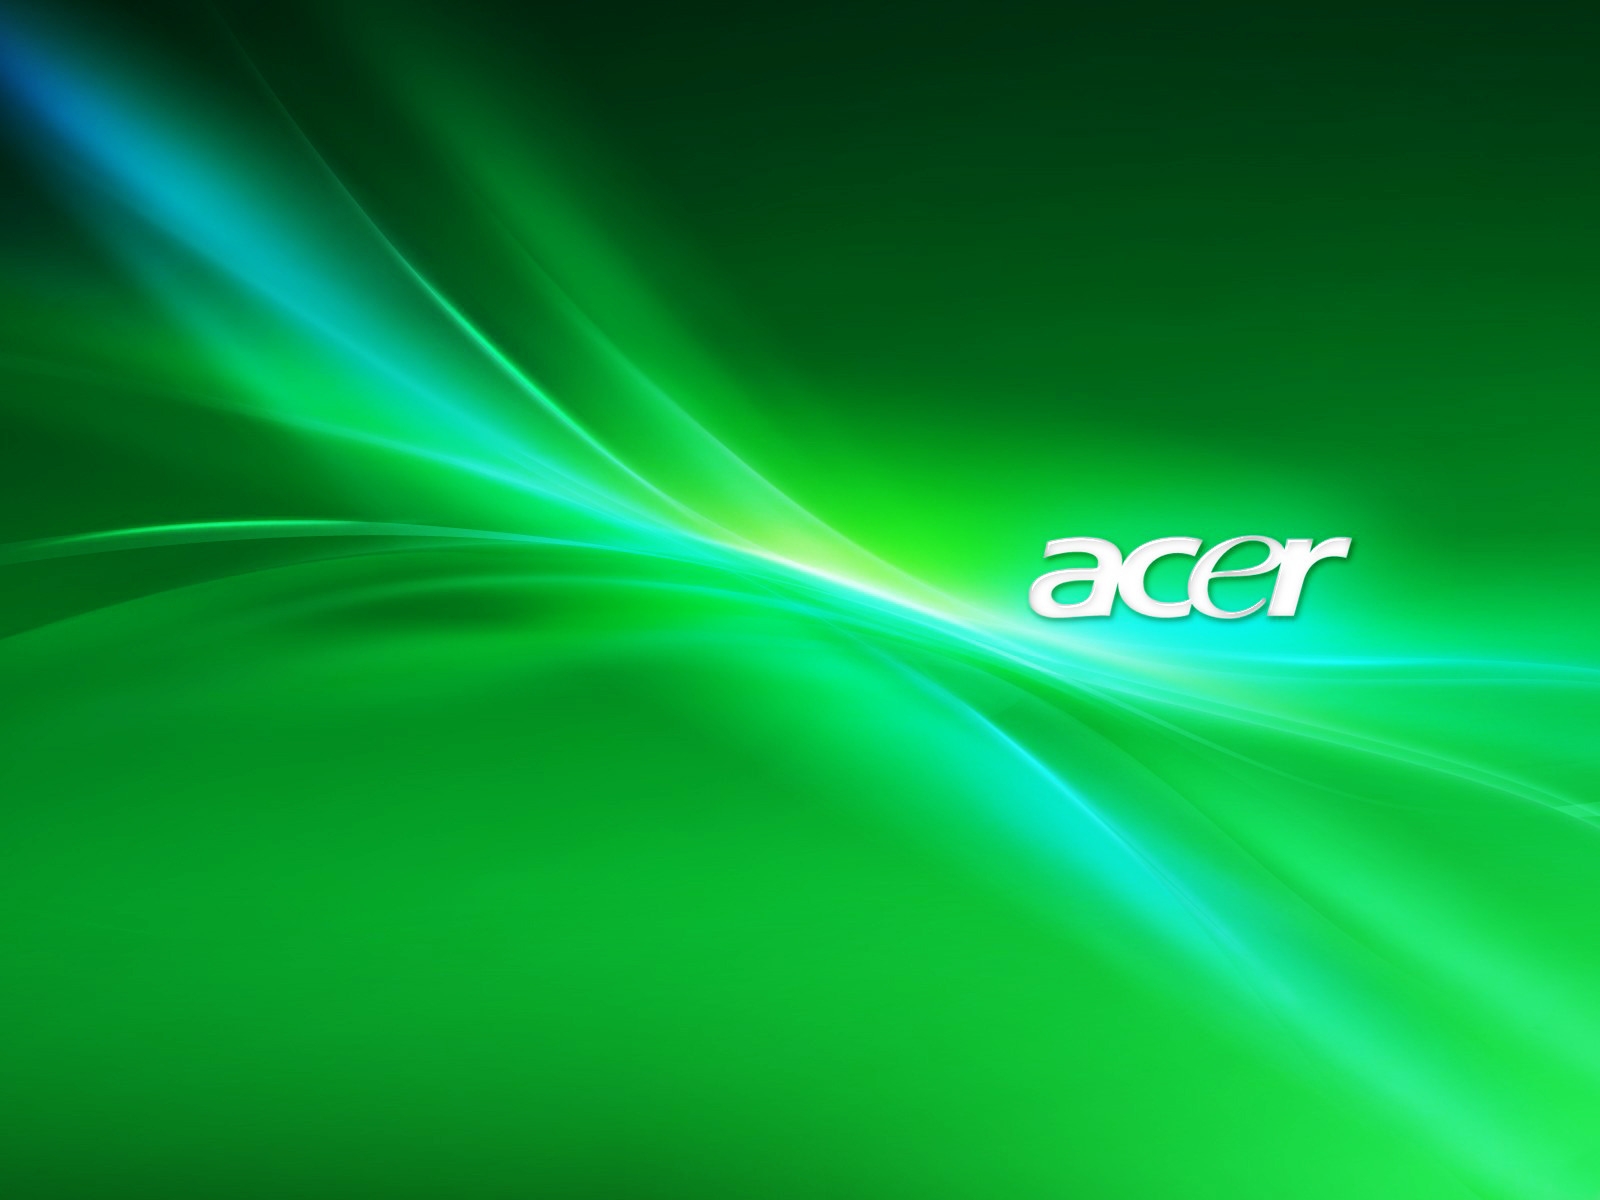 Acer Green for 1600 x 1200 resolution